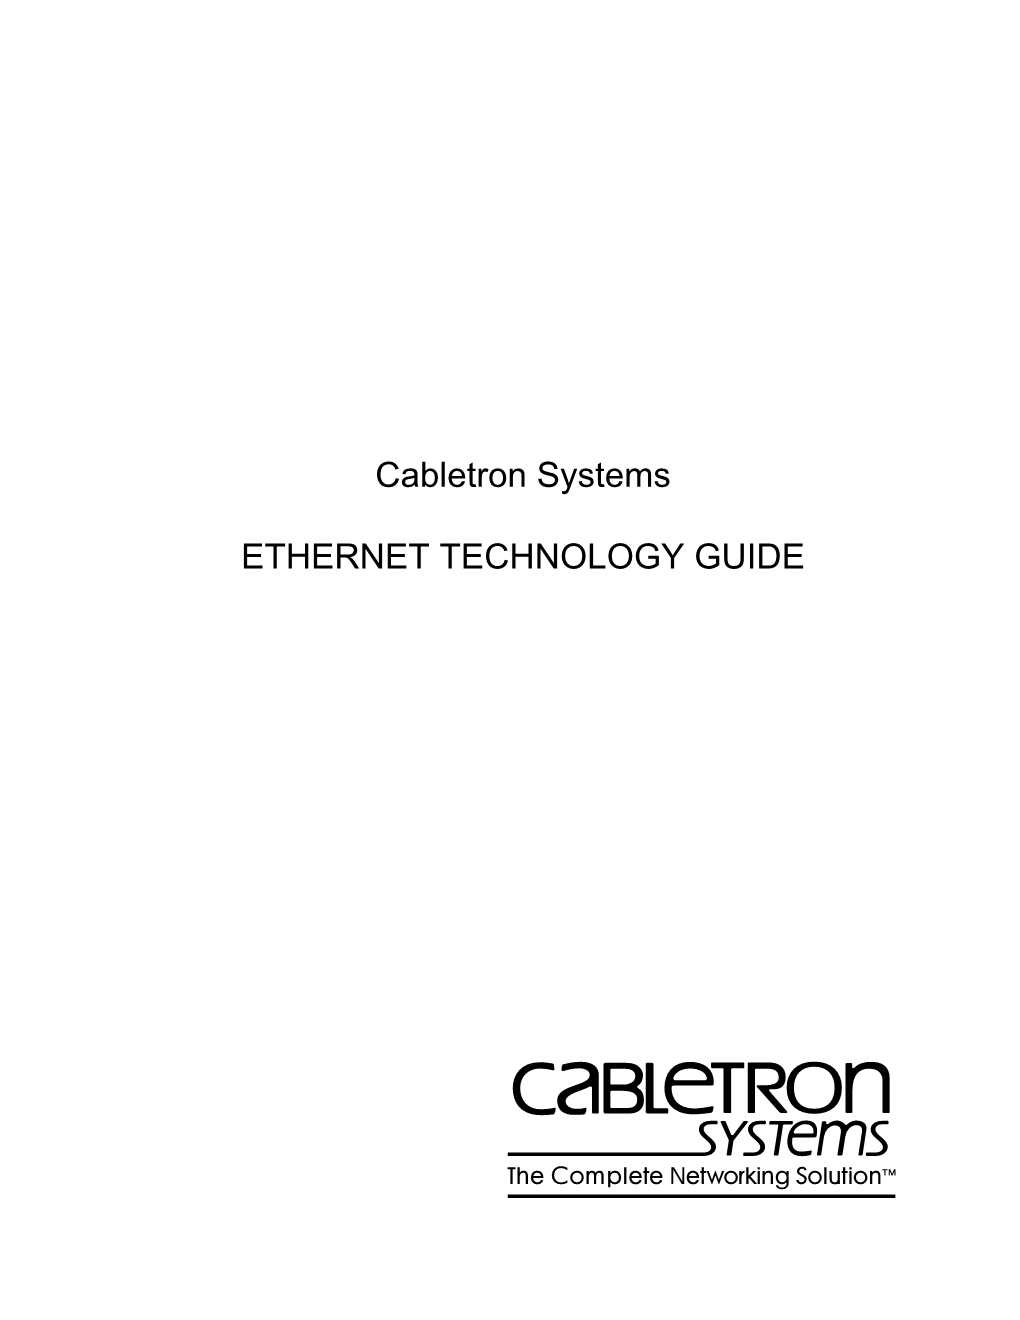 Cabletron Systems Ethernet Technology Guide